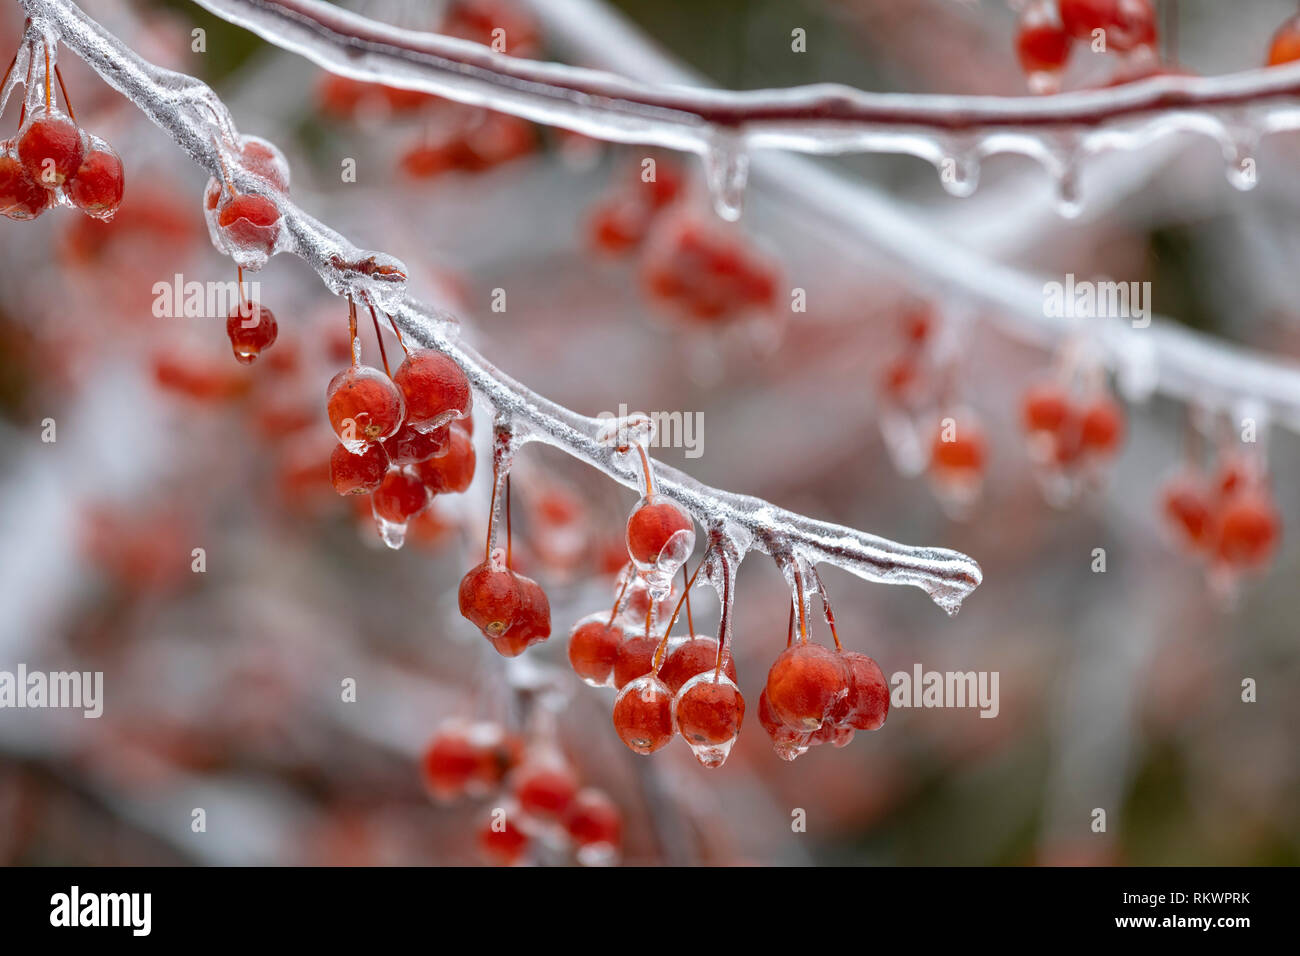 Detroit, Michigan USA - 12 February 2019 - A crab apple tree is coated in ice after snow, sleet, and freezing rain fell in southeast Michigan. Credit: Jim West/Alamy Live News Stock Photo